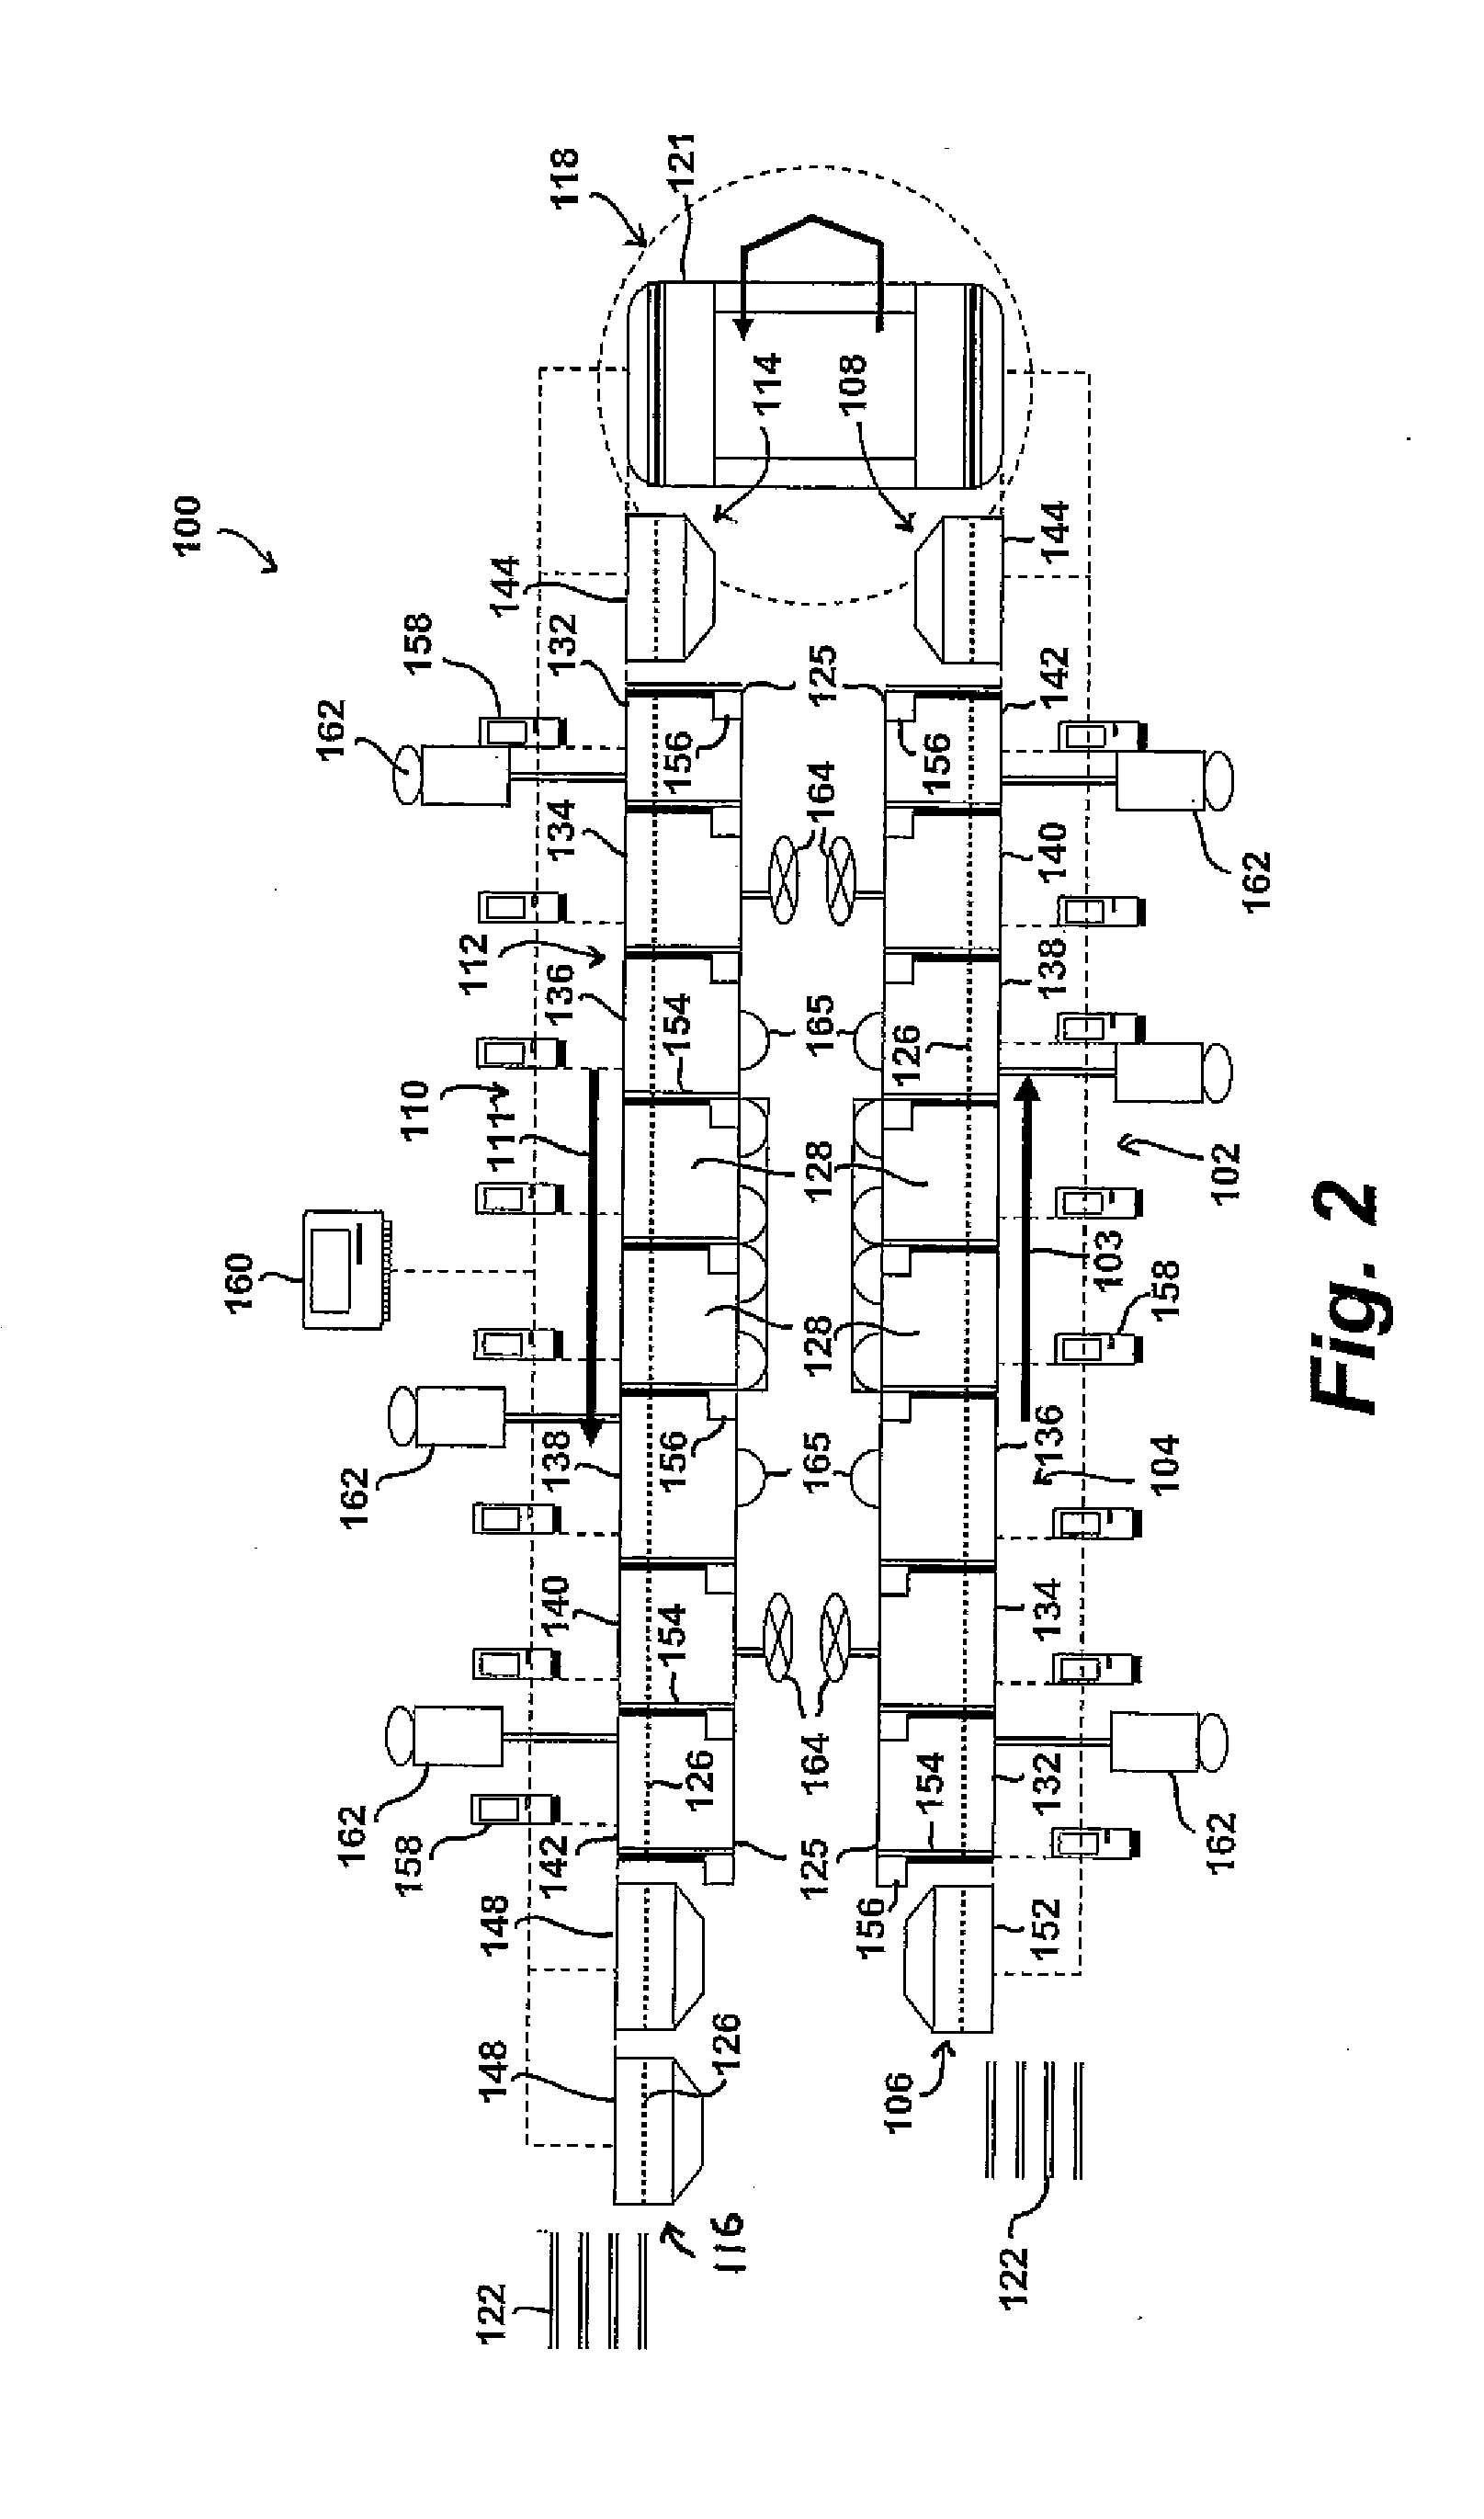 Methods for high-rate sputtering of a compound semiconductor on large area substrates